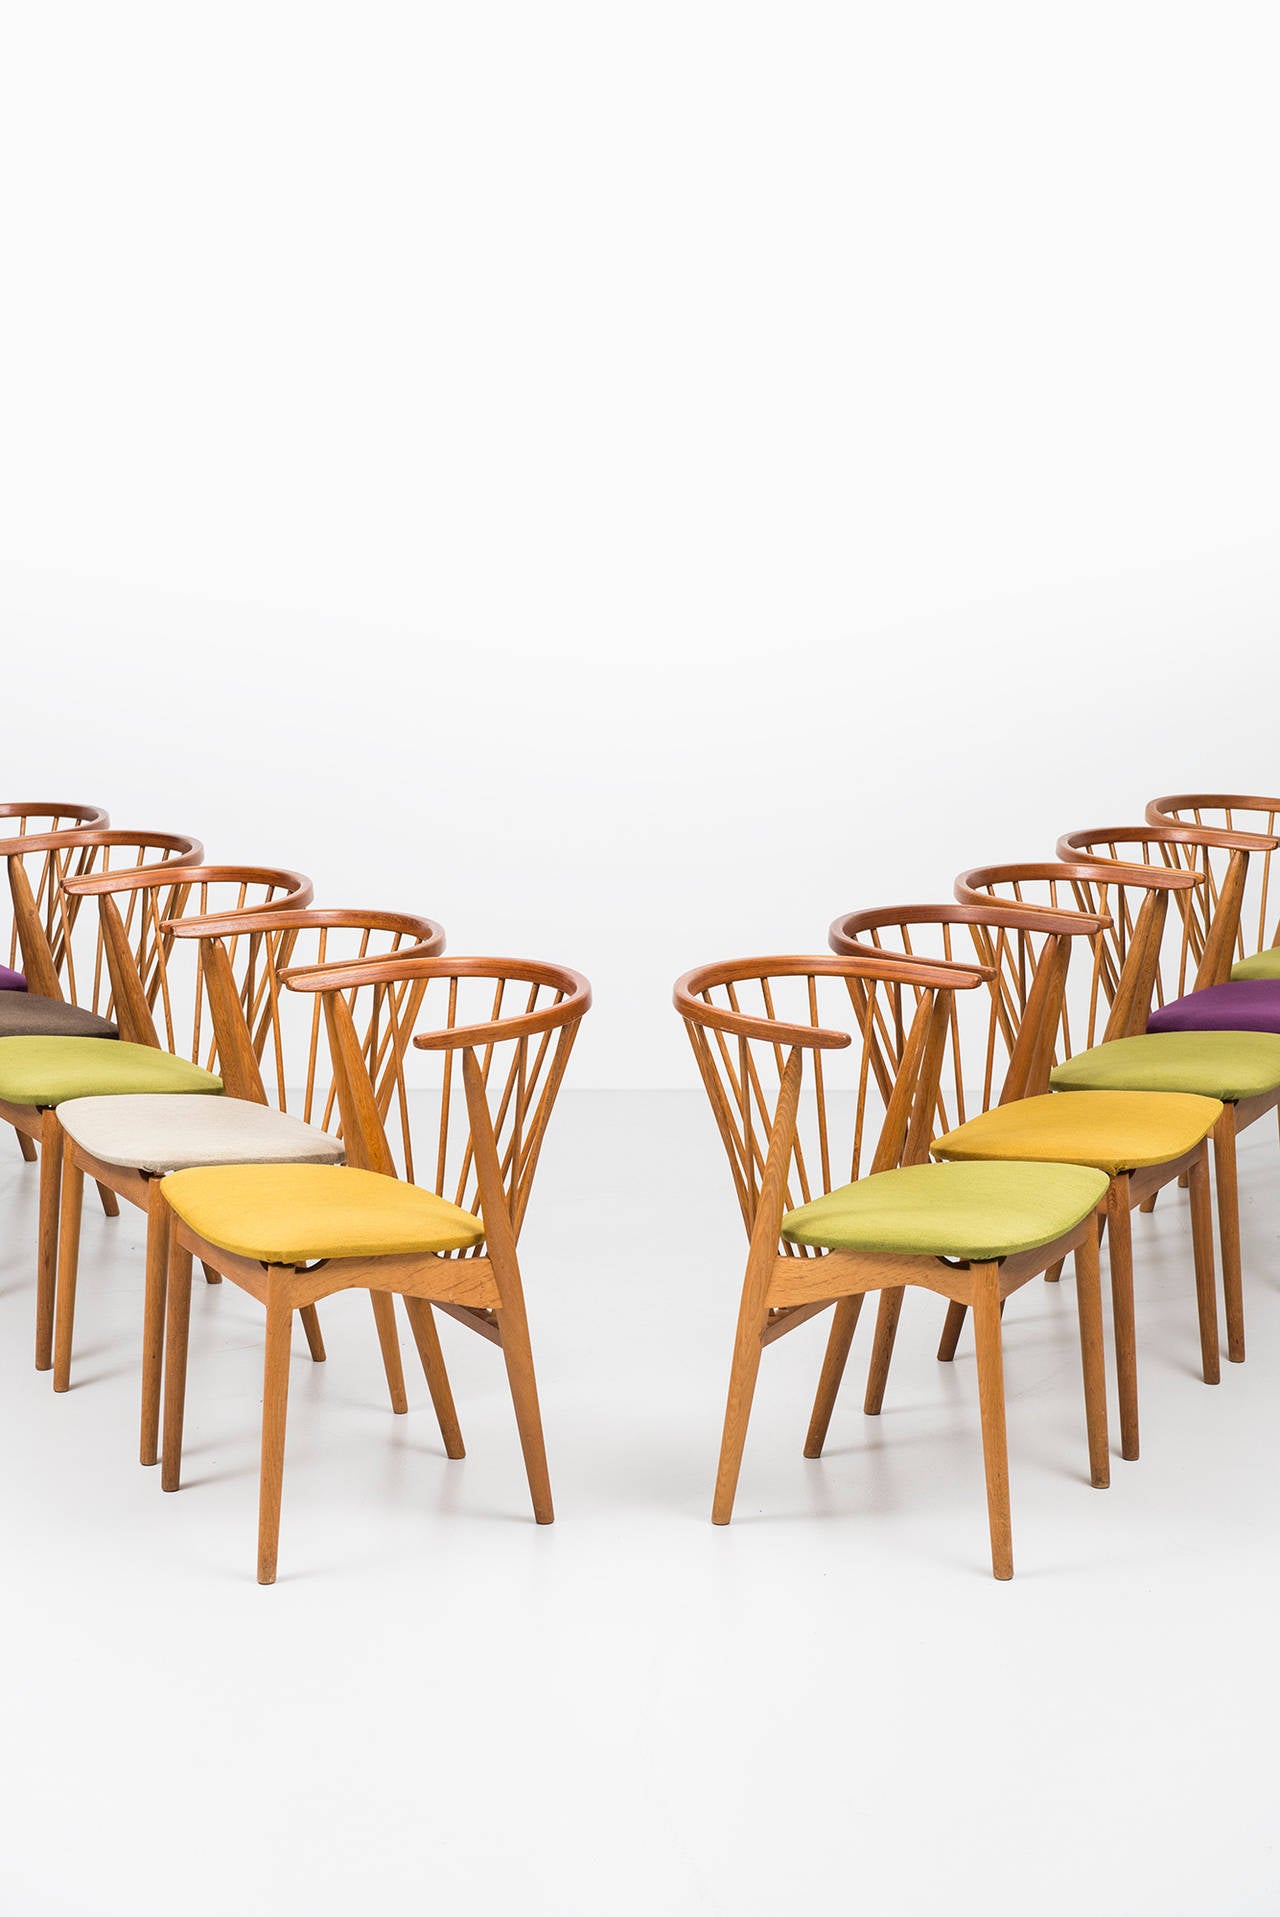 Rare set of ten dining chairs model nr six designed by Helge Sibast. Produced by Sibast møbelfabrik in Denmark.